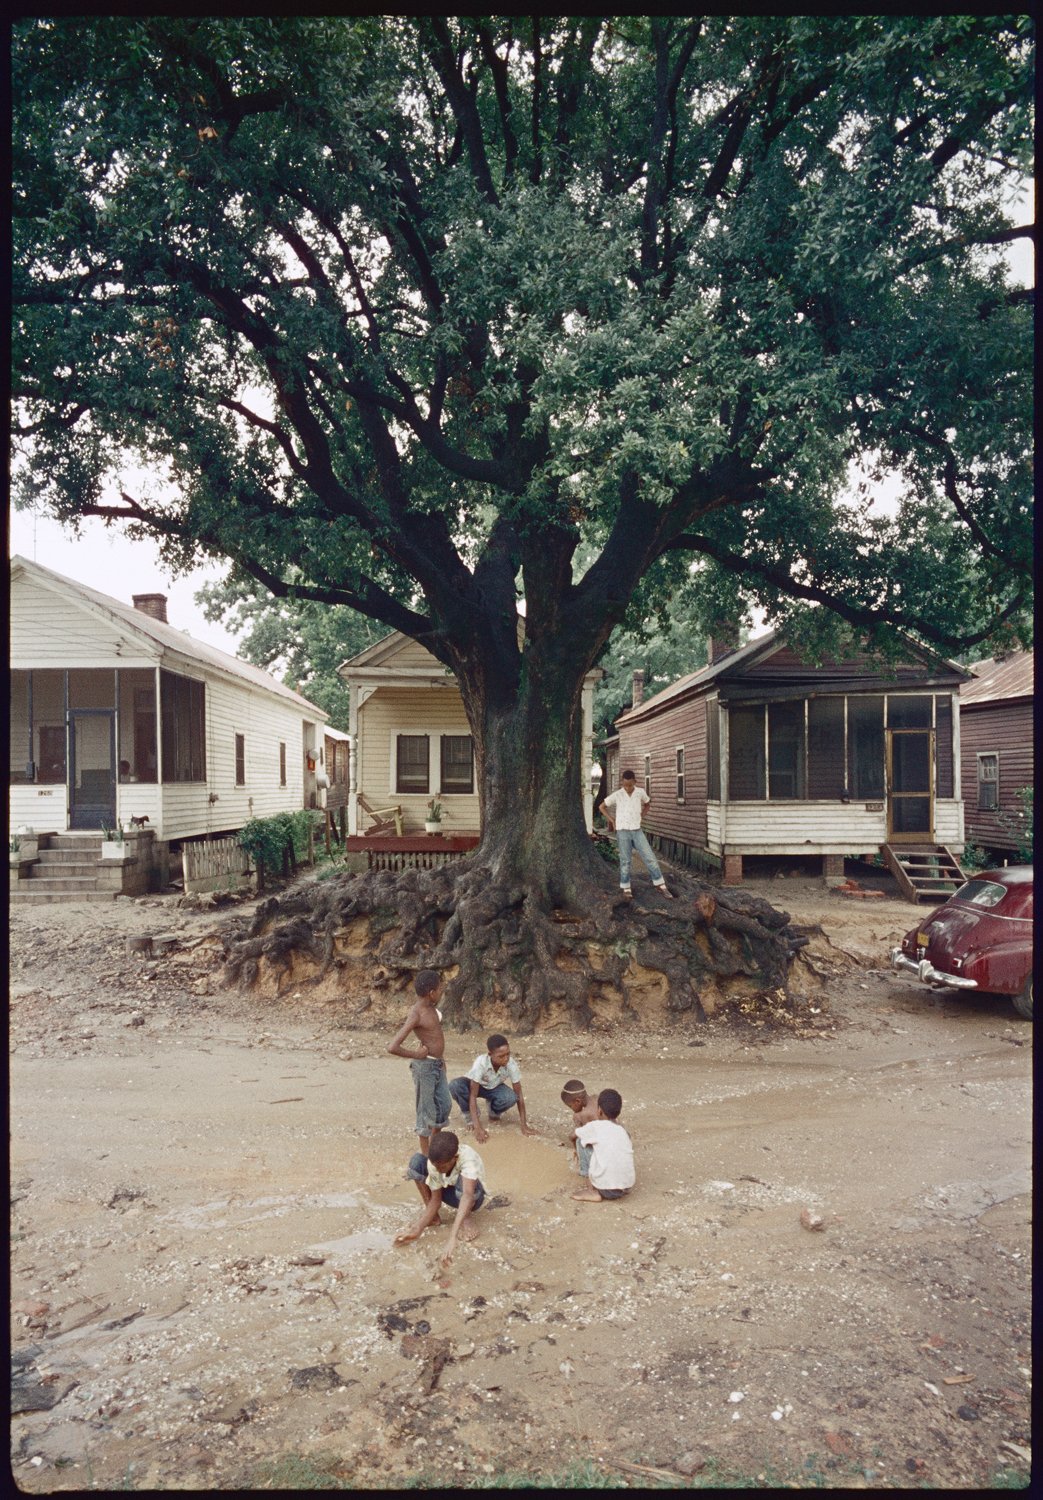  Gordon Parks  Children at Play, Mobile, Alabama , 1956 Edition: 10/25 Archival pigment print  14 x 14 in. (image size)  The Do Good Fund, Inc., 2015-007 Photograph by Gordon Parks Courtesy of and copyright The Gordon Parks Foundation 